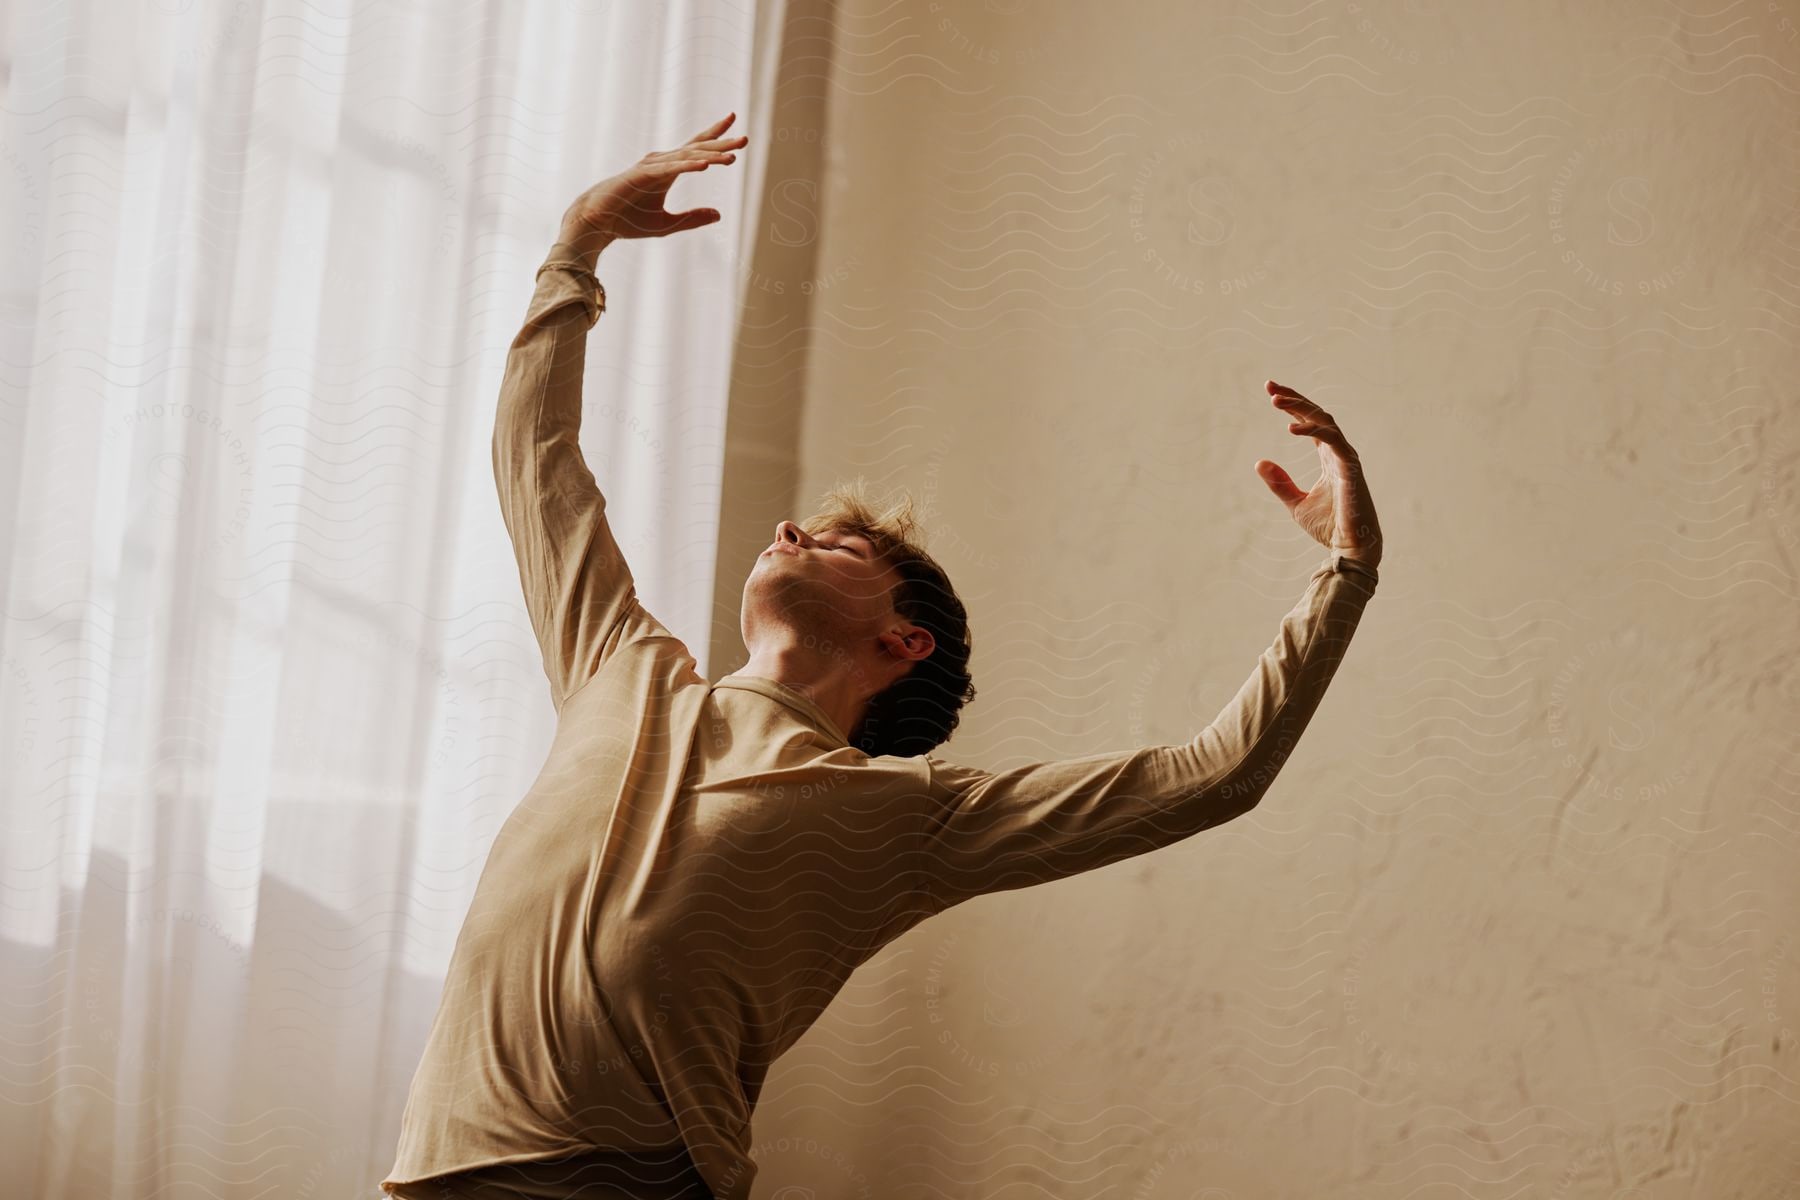 A man in a brown sweatshirt dances in front of curtains and a brown wall